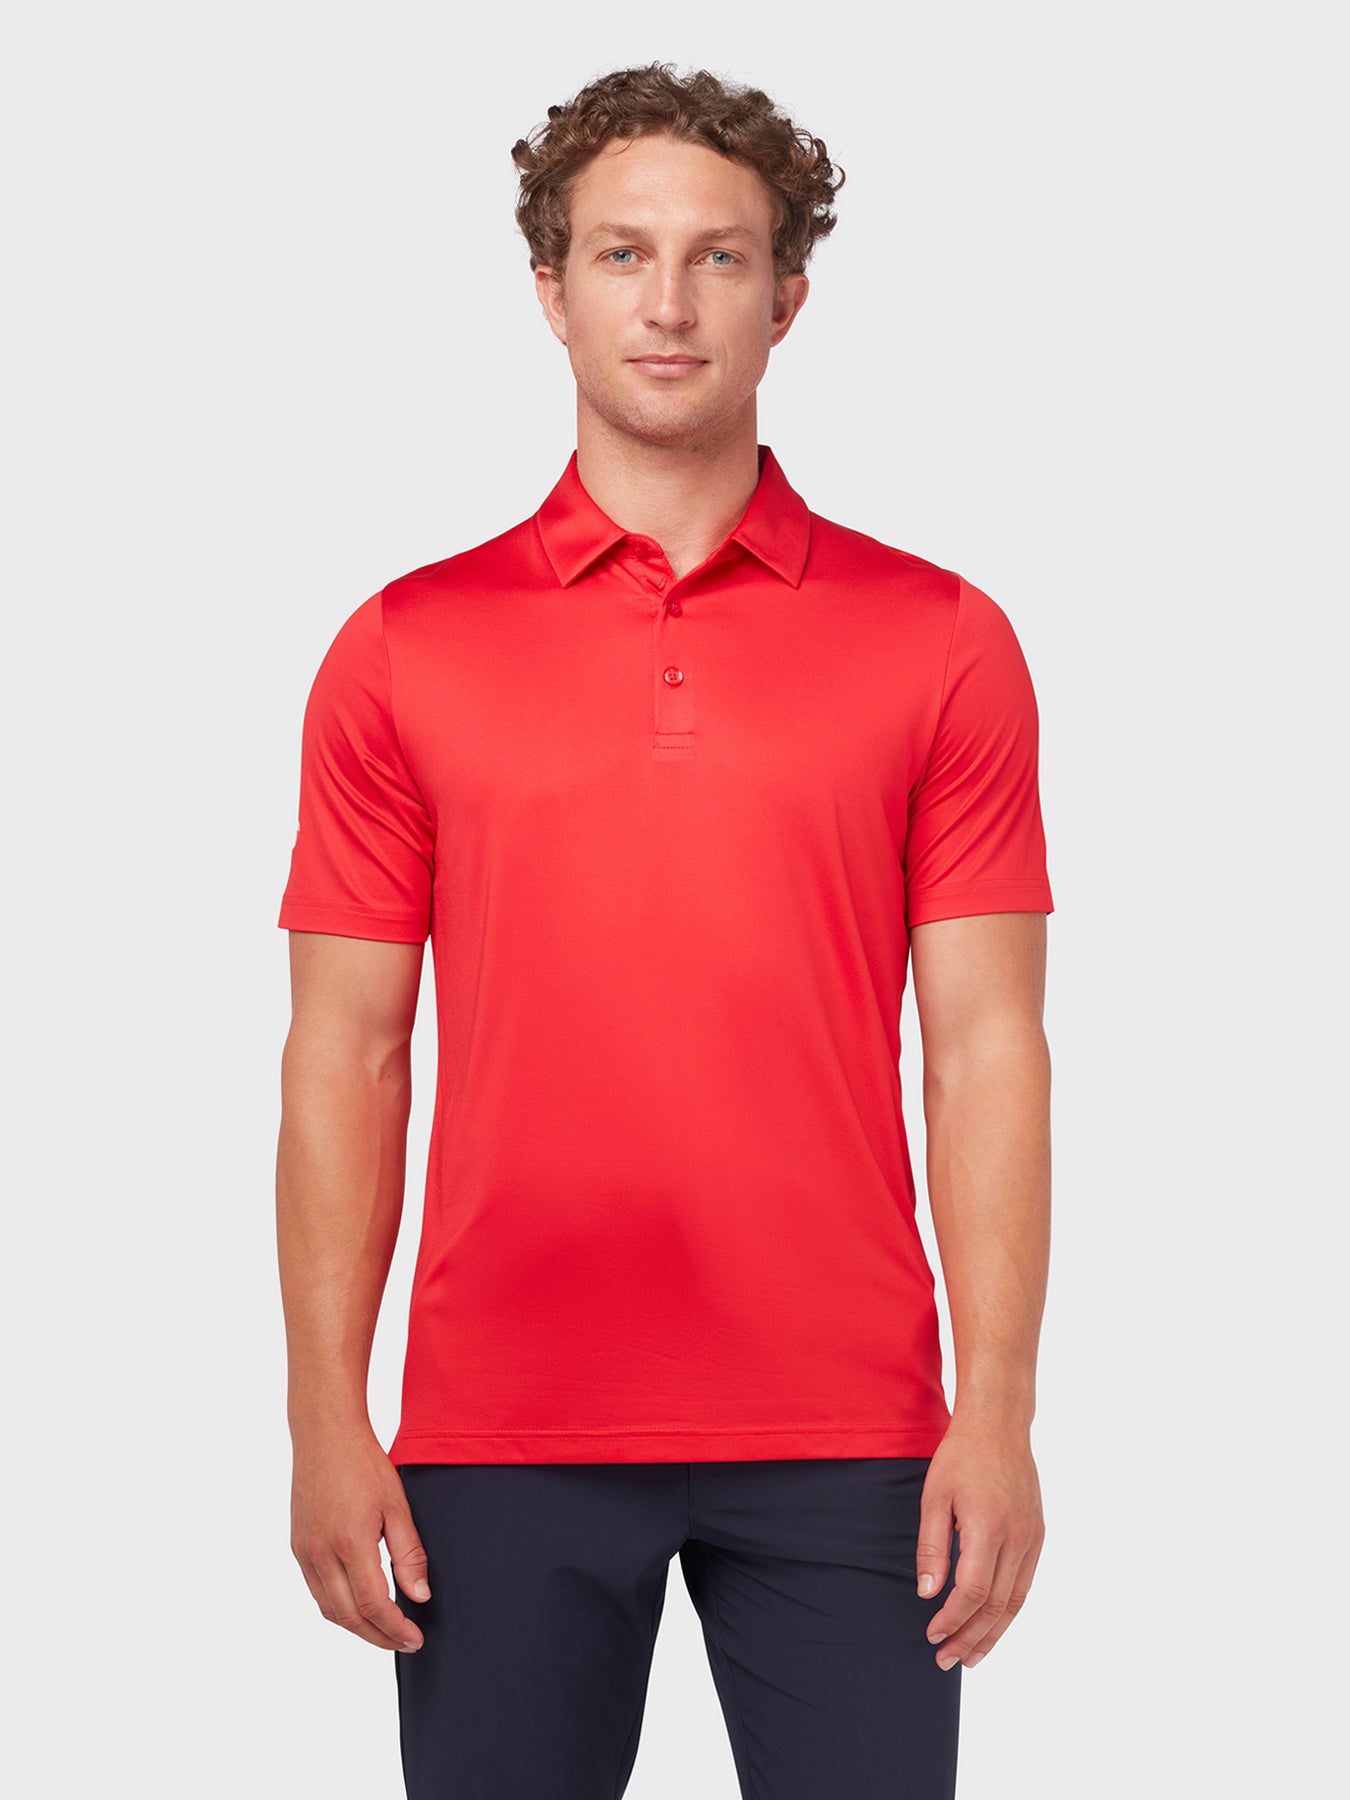 View Swing Tech Tour Polo In True Red True Red M information